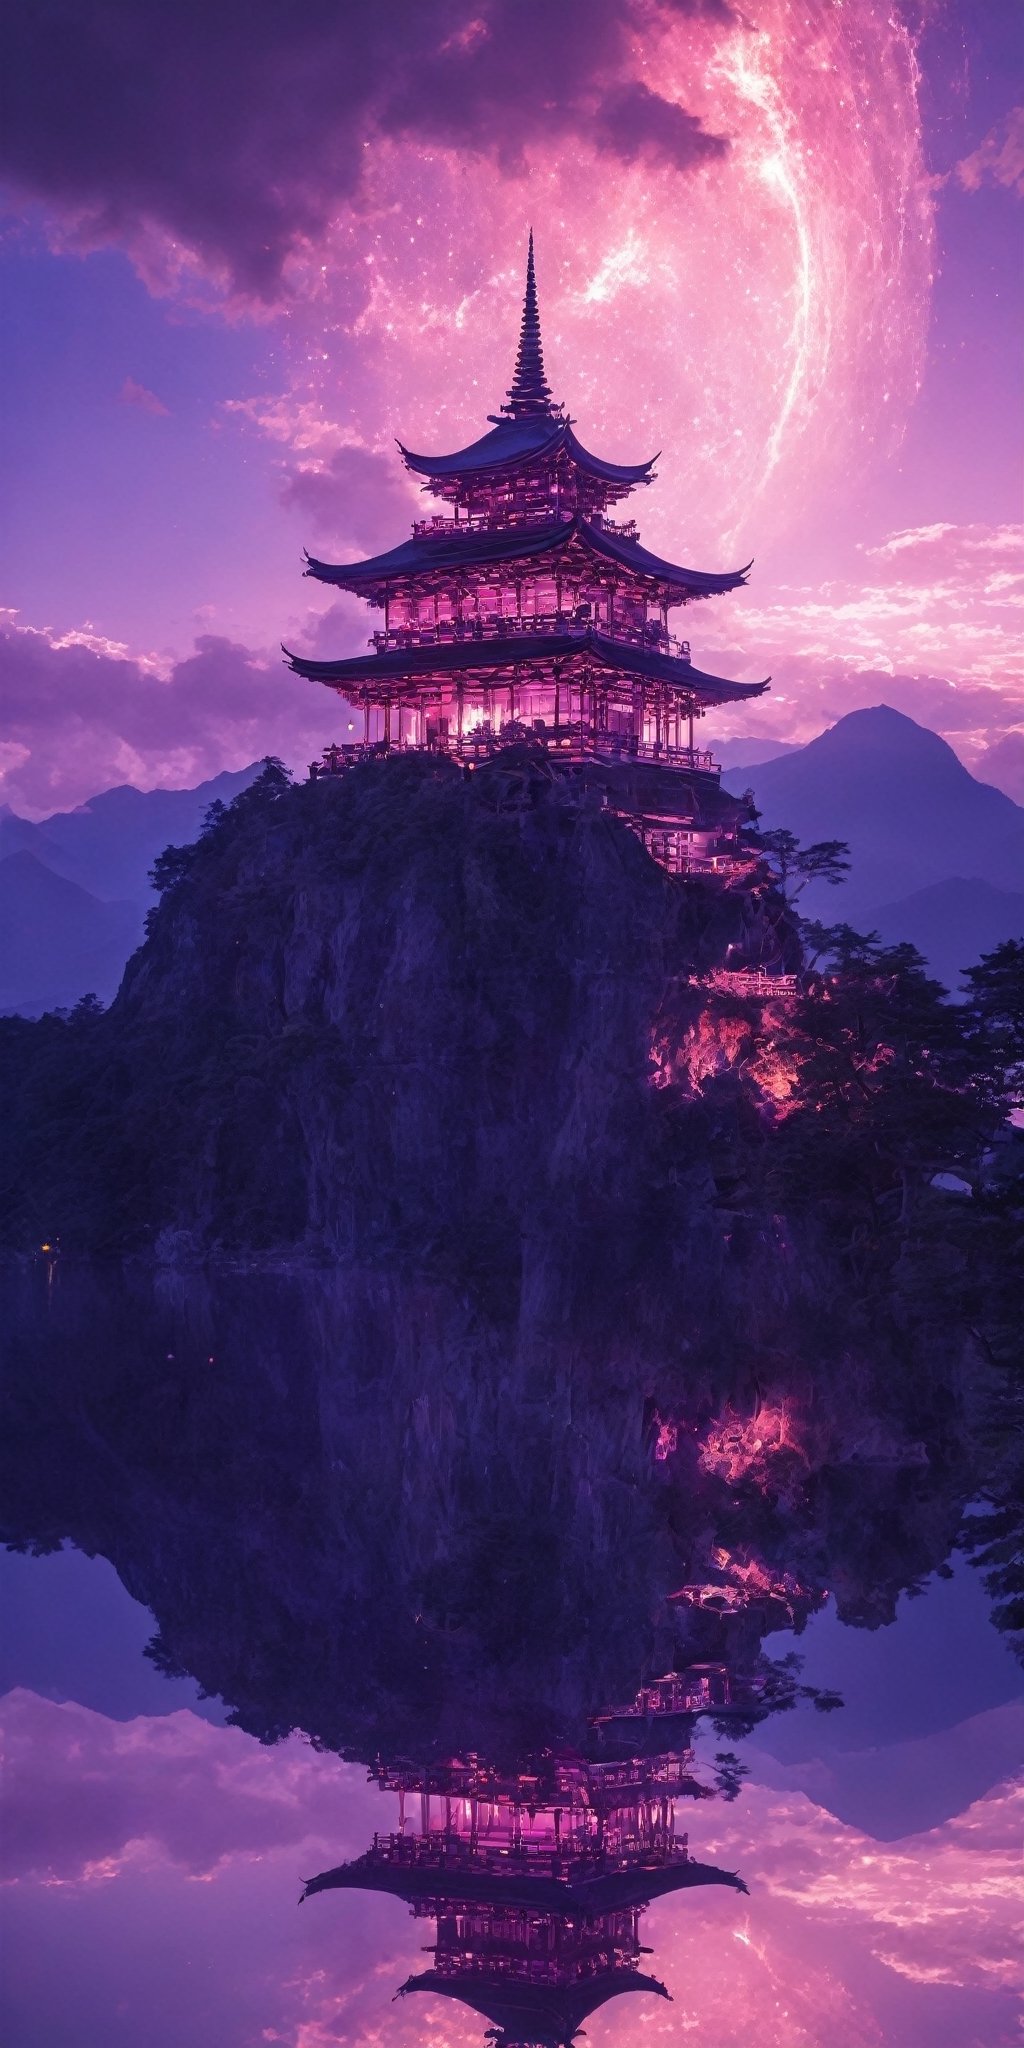 ((Wallpaper, Masterpiece, Intricate Detail)) Beneath the evening sky, behind the violet-colored mountain was a towering peak which stretched up to the sky, Half way up the mountain was a giant majestic pavilion, the greater part of which stretched out of the mountain to hang in mid-air with a fairy goddess in the front, At nighttime, when the stars came out, it almost seemed possible to reach up and touch the sky, he rays of the setting sun fell across everything, creating a languid atmosphere, The golden glow combined with the rosy clouds on the horizon led to a scene of incredible beauty, by Lenkaizm, tenkaippin, hyper-detail, vibrant, photo-realistic, ethereal vibe, heavenly rays